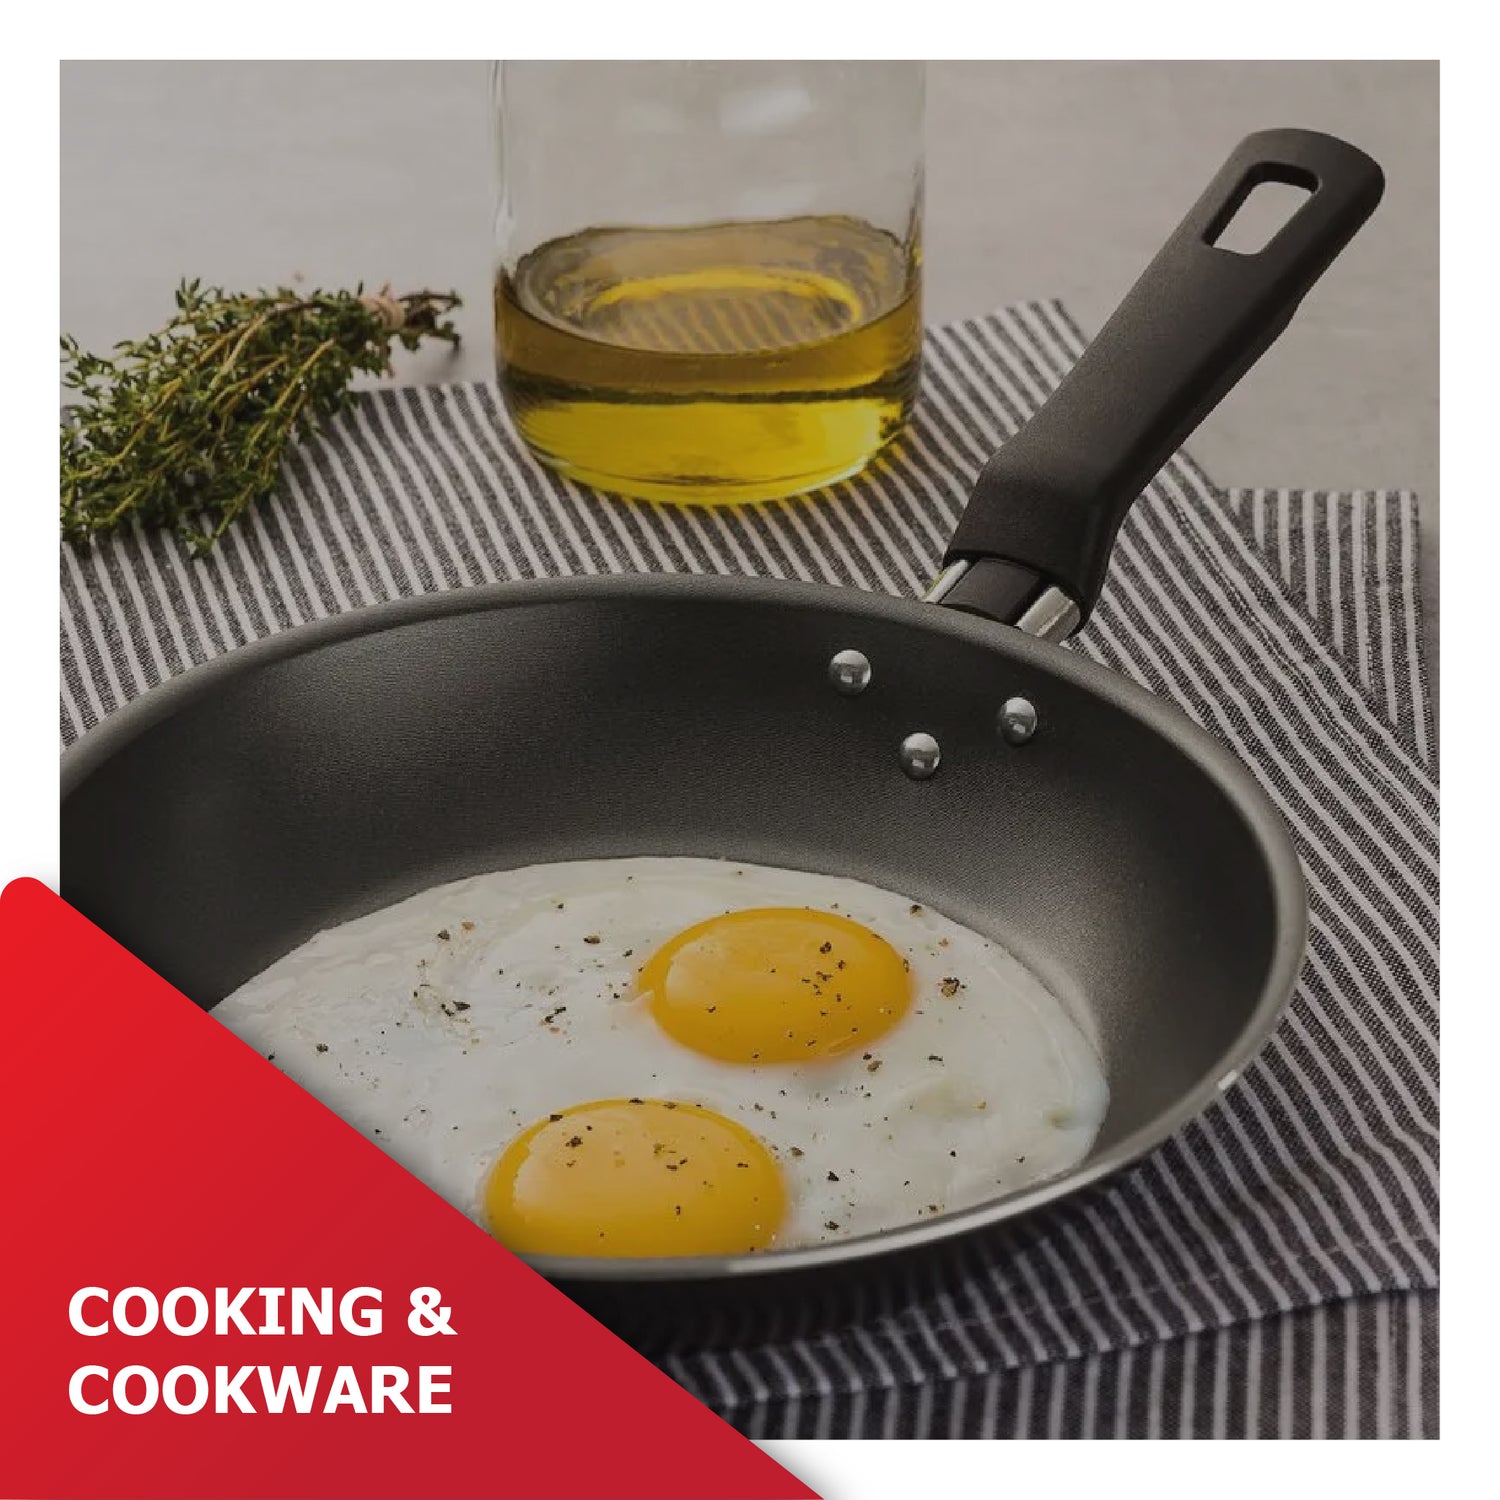 Cooking & Cookware  | Category